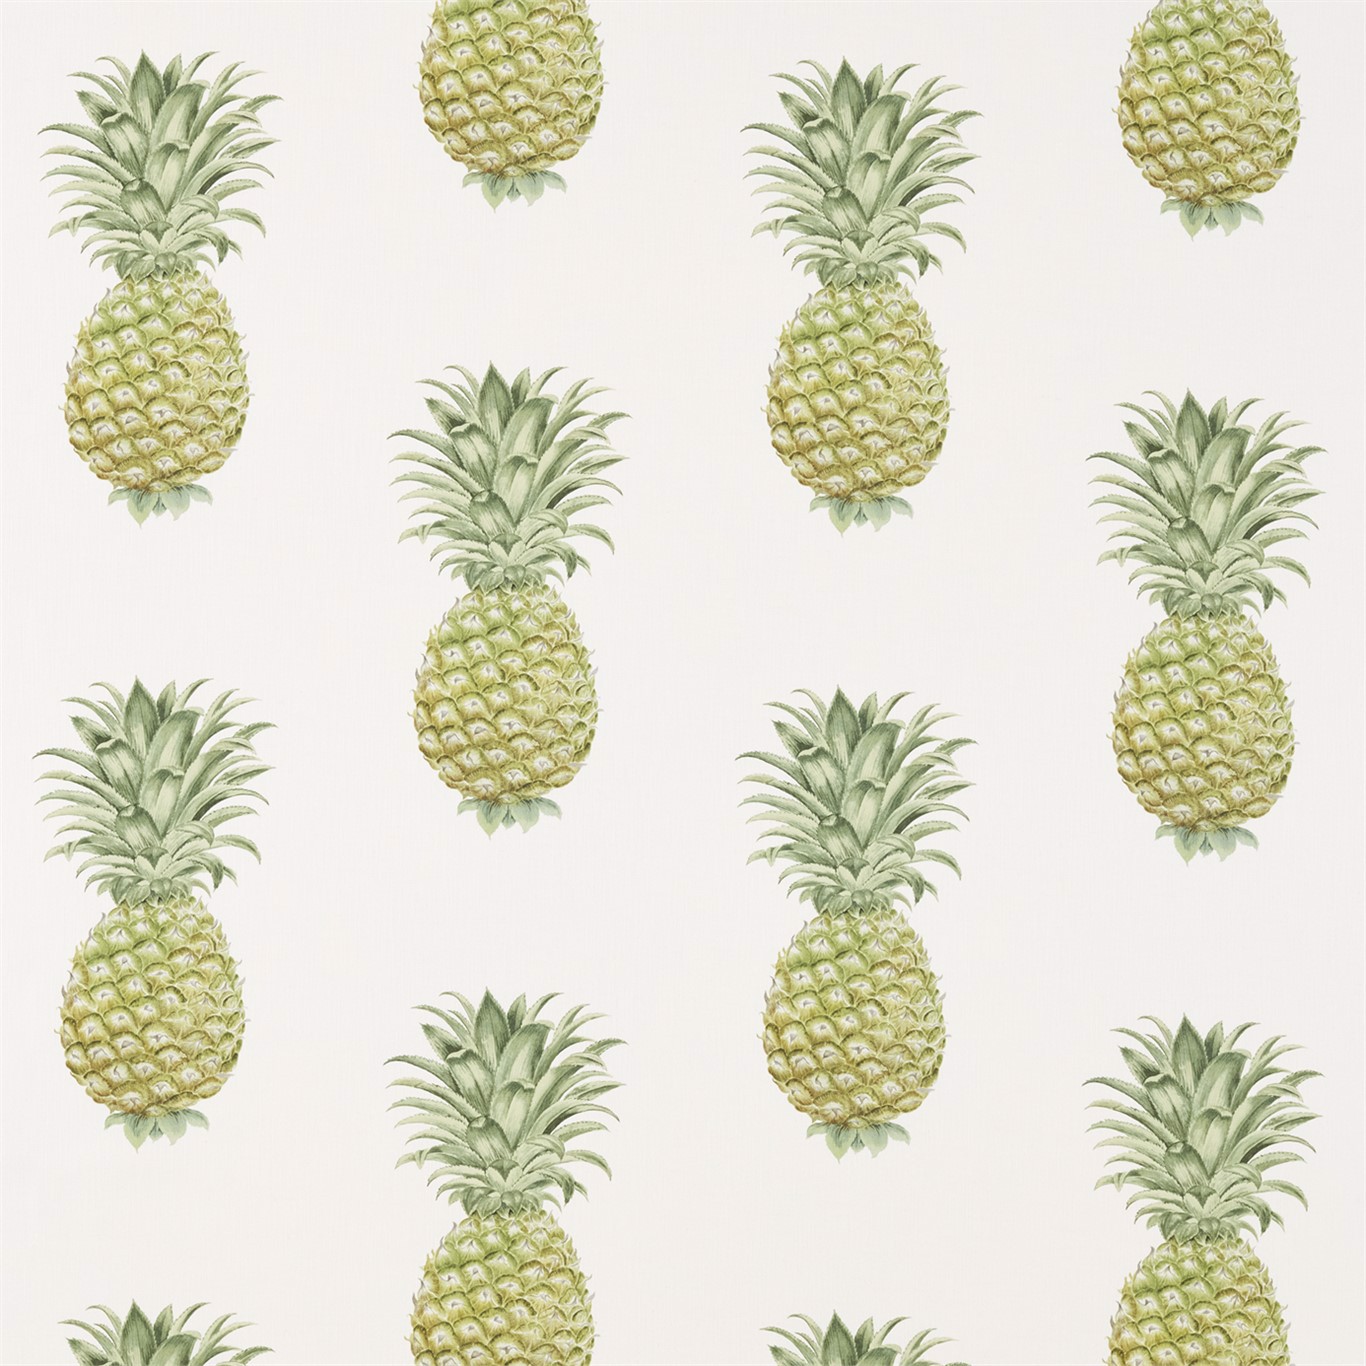 Pineapple Royale Garden Green Fabric by SAN